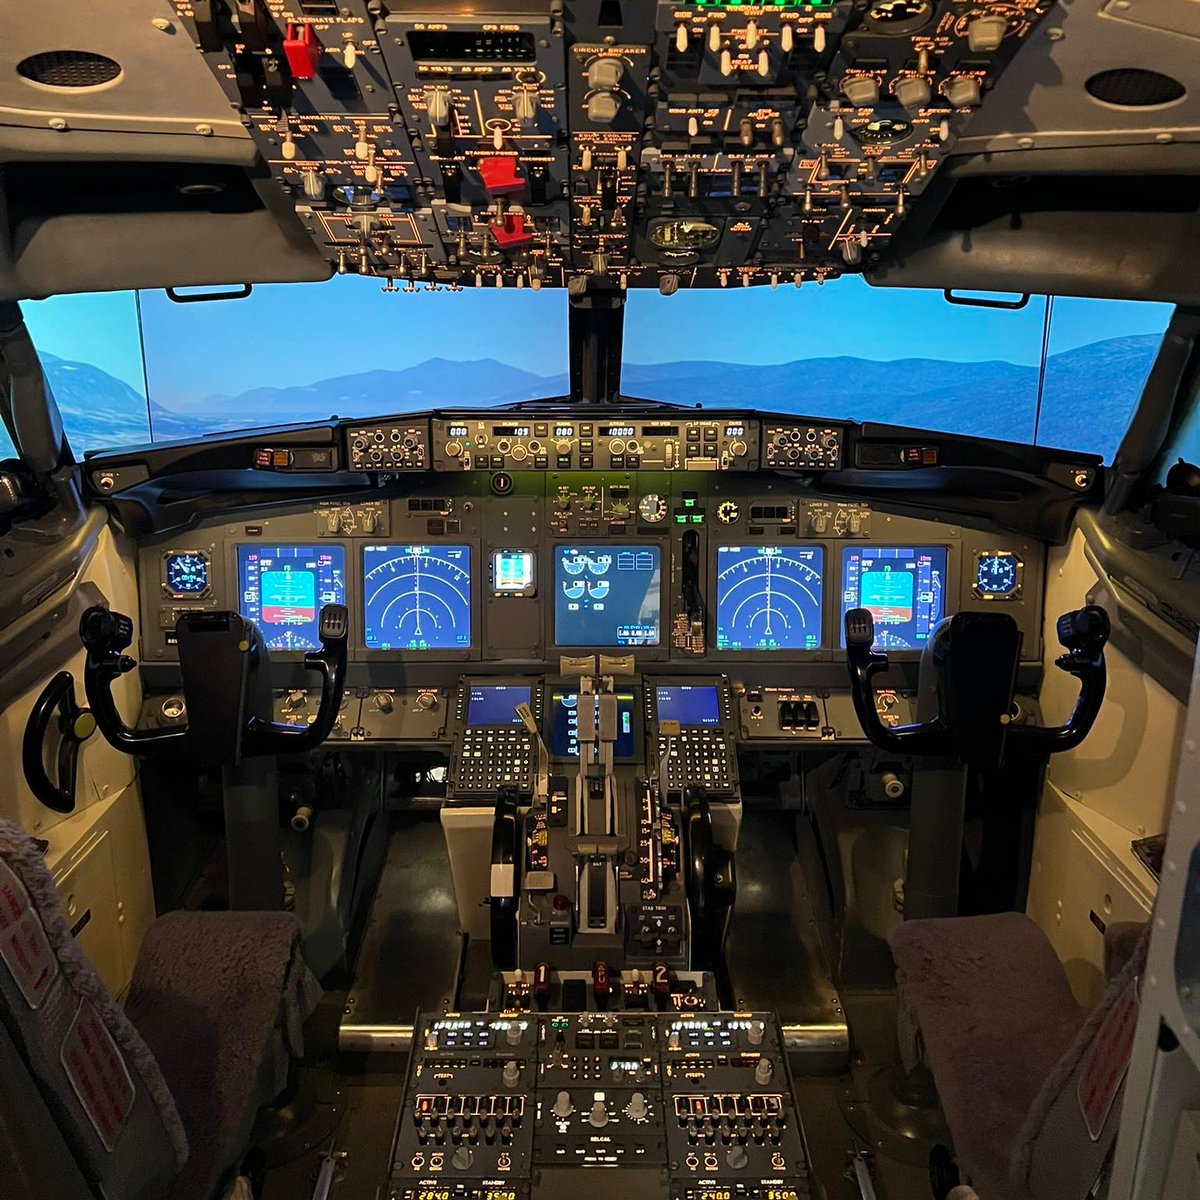 How much fun would this be! Check out Somerset based JetEx Simulation, who delivers 737 flight simulator training and experiences to pilots, aviation enthusiasts and thrill-seekers in a full motion flight simulator ✈️

mylocalservices.co.uk/JetEx+Simulati…
#SupportLocal #Business